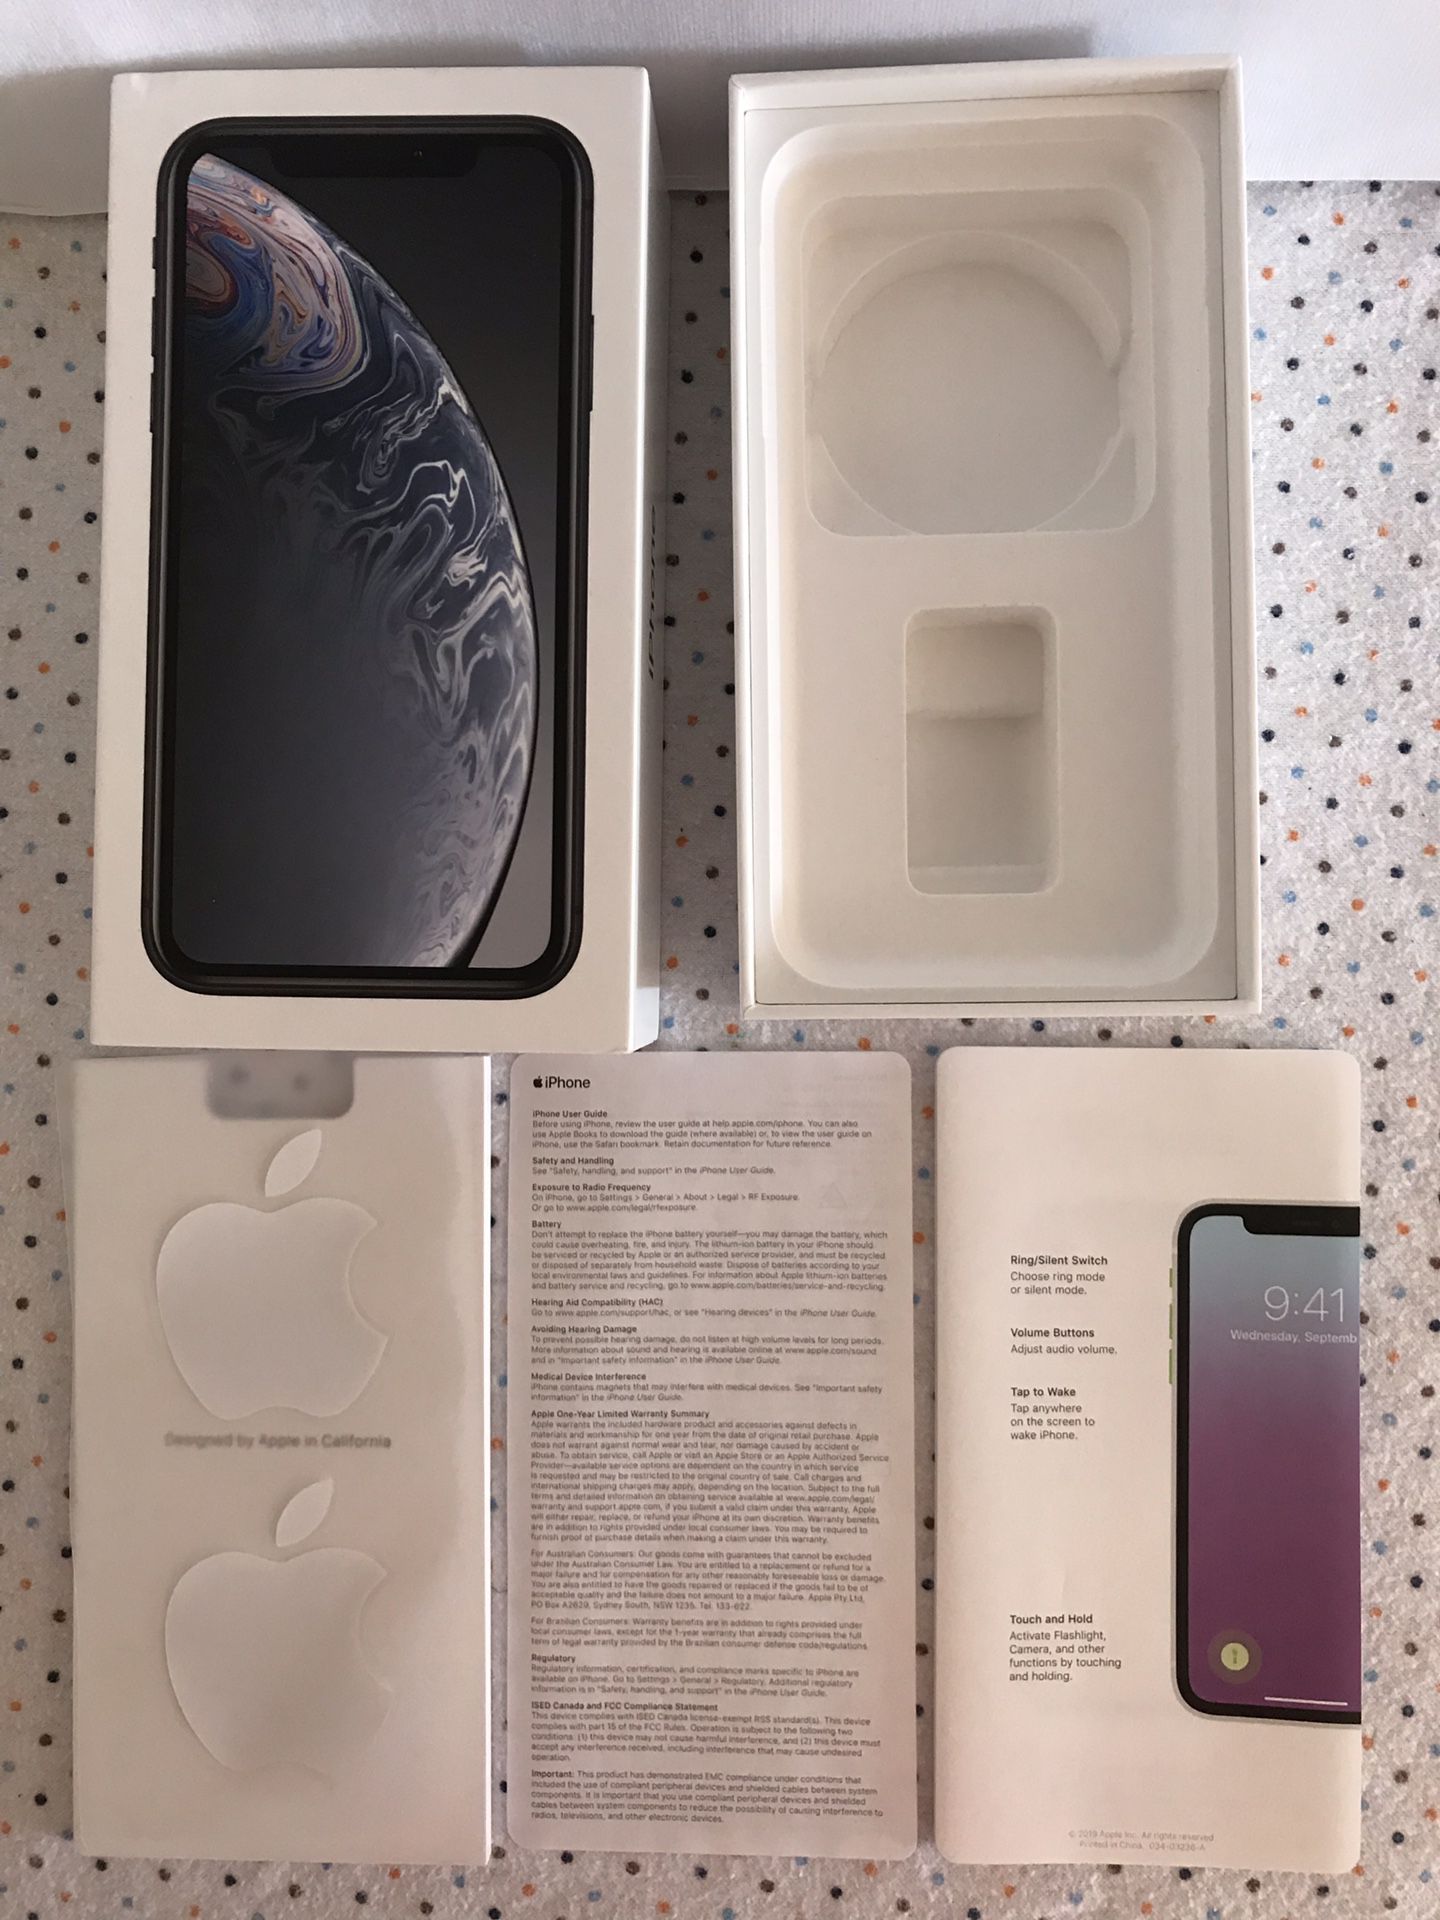 Apple IPhone XR 64 GB Black Empty Box & Insert Booklets ONLY